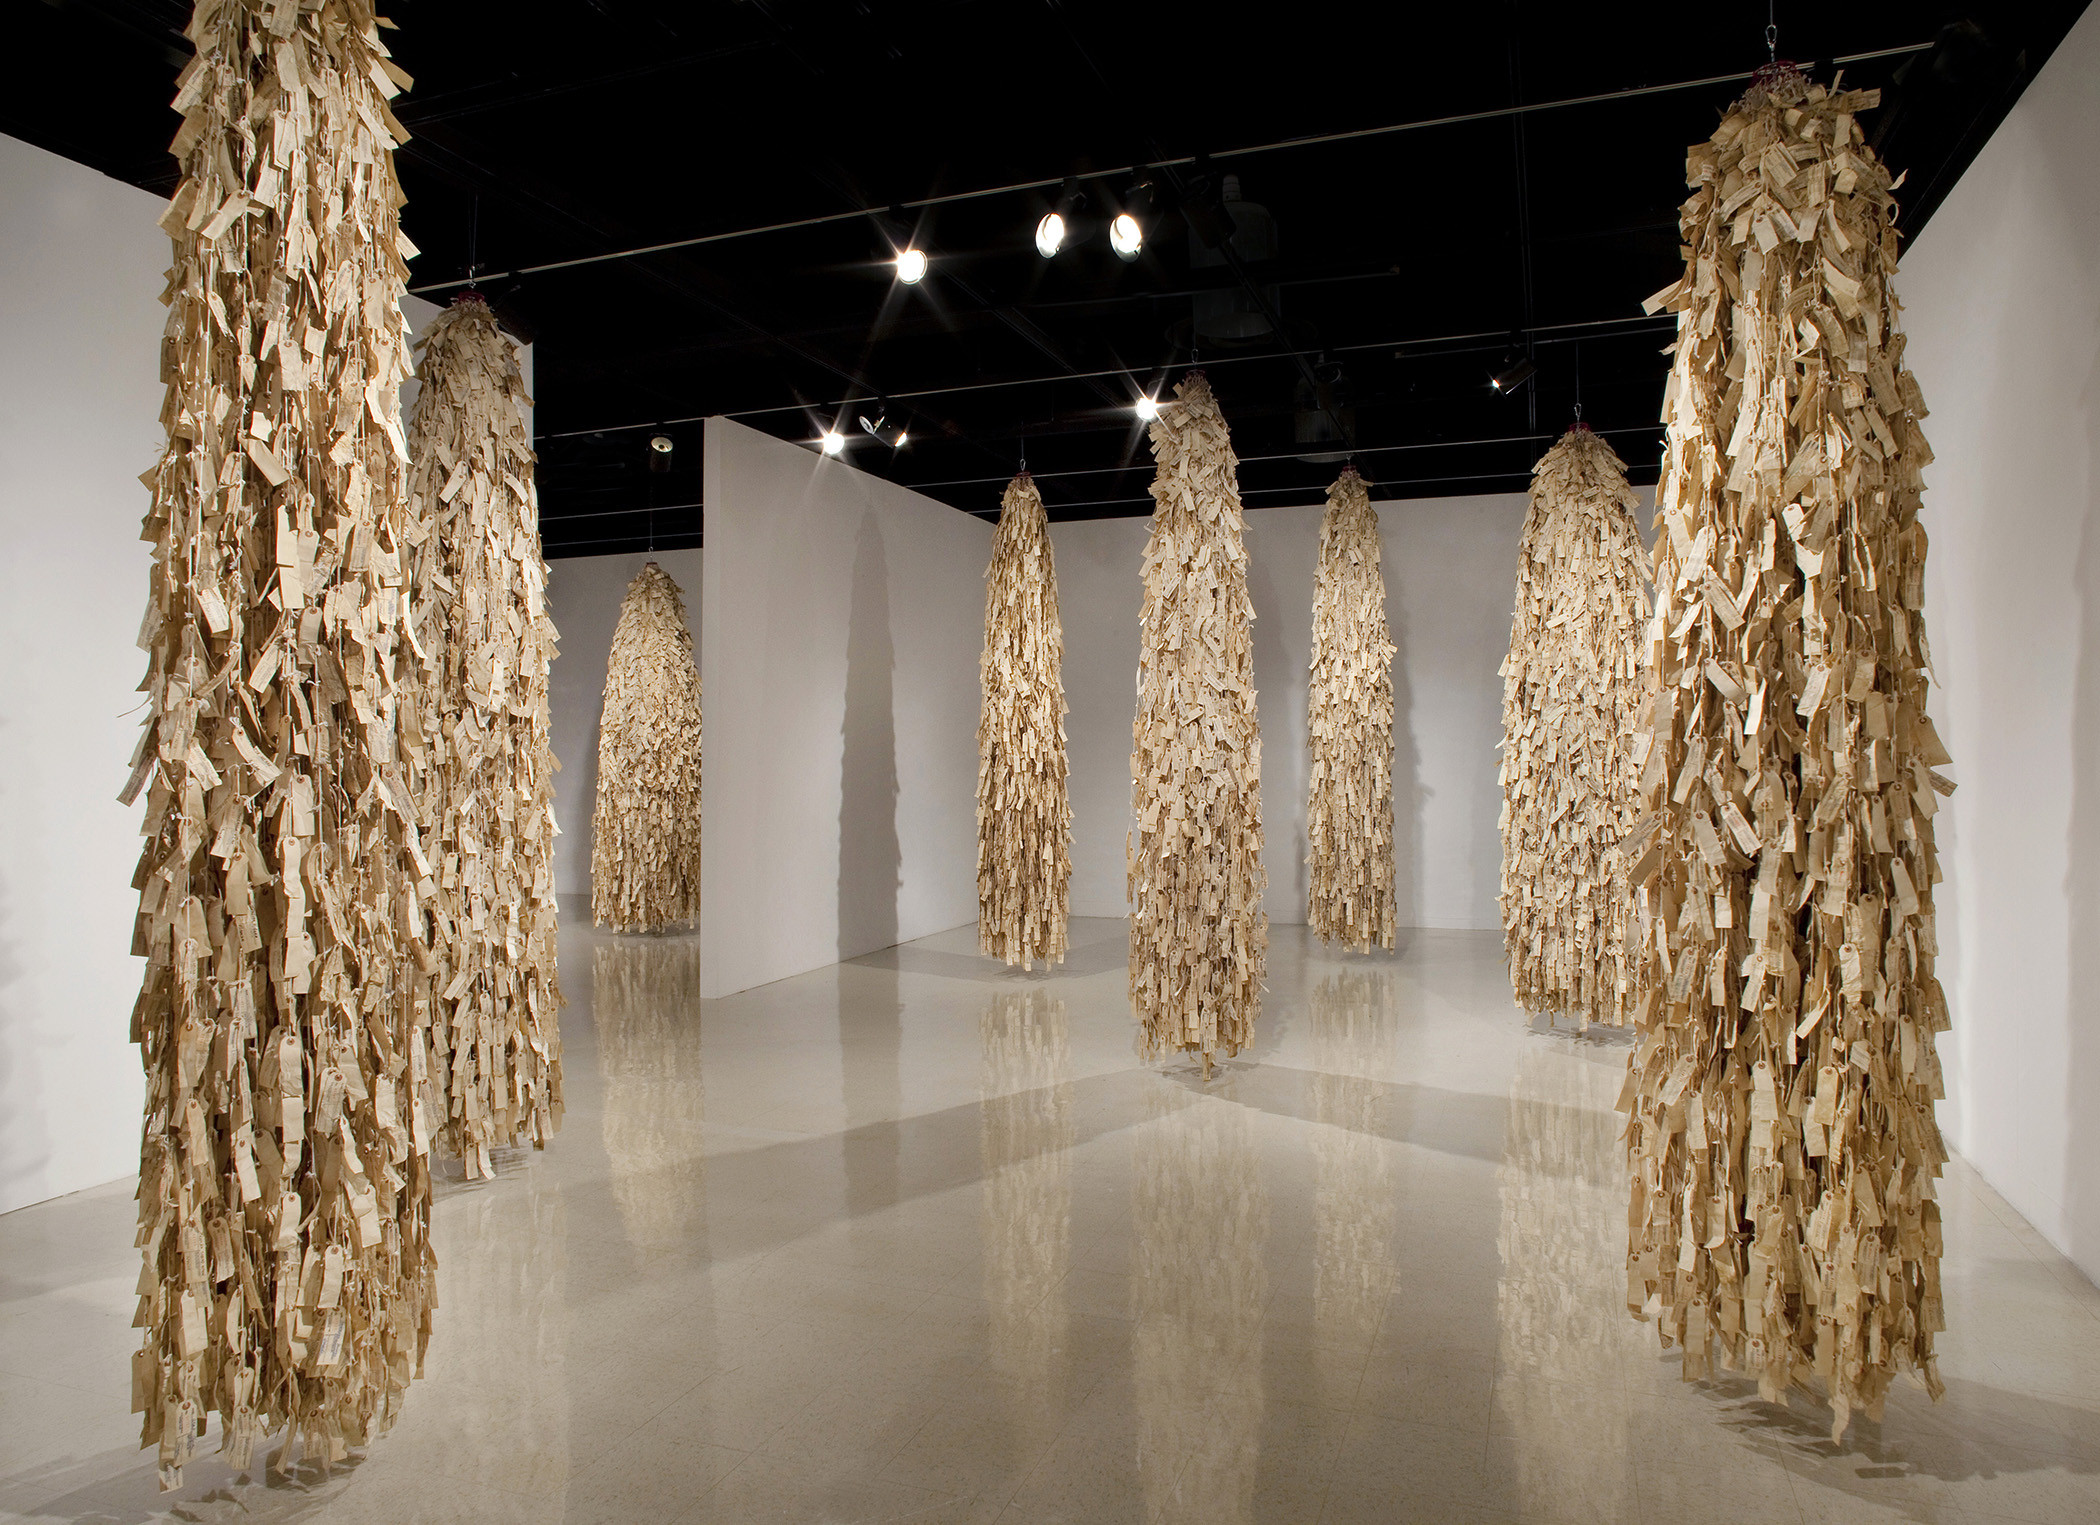 large hanging sculptures made from hundreds of name tags